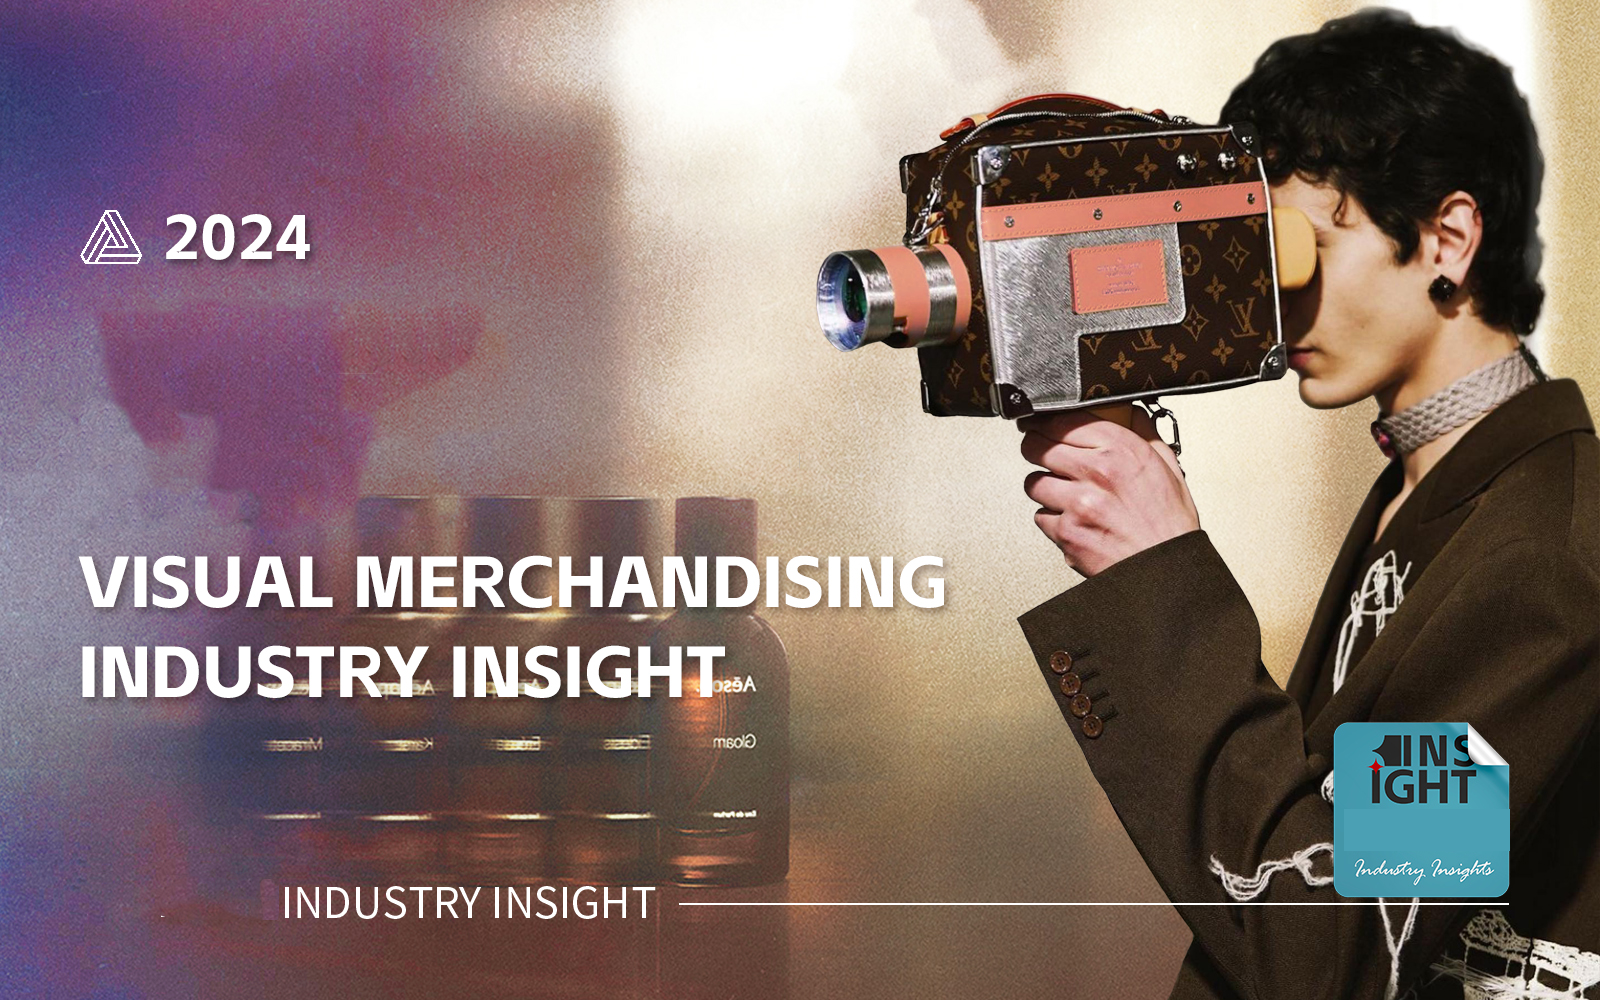 The Industry Insight of Visual Merchandising